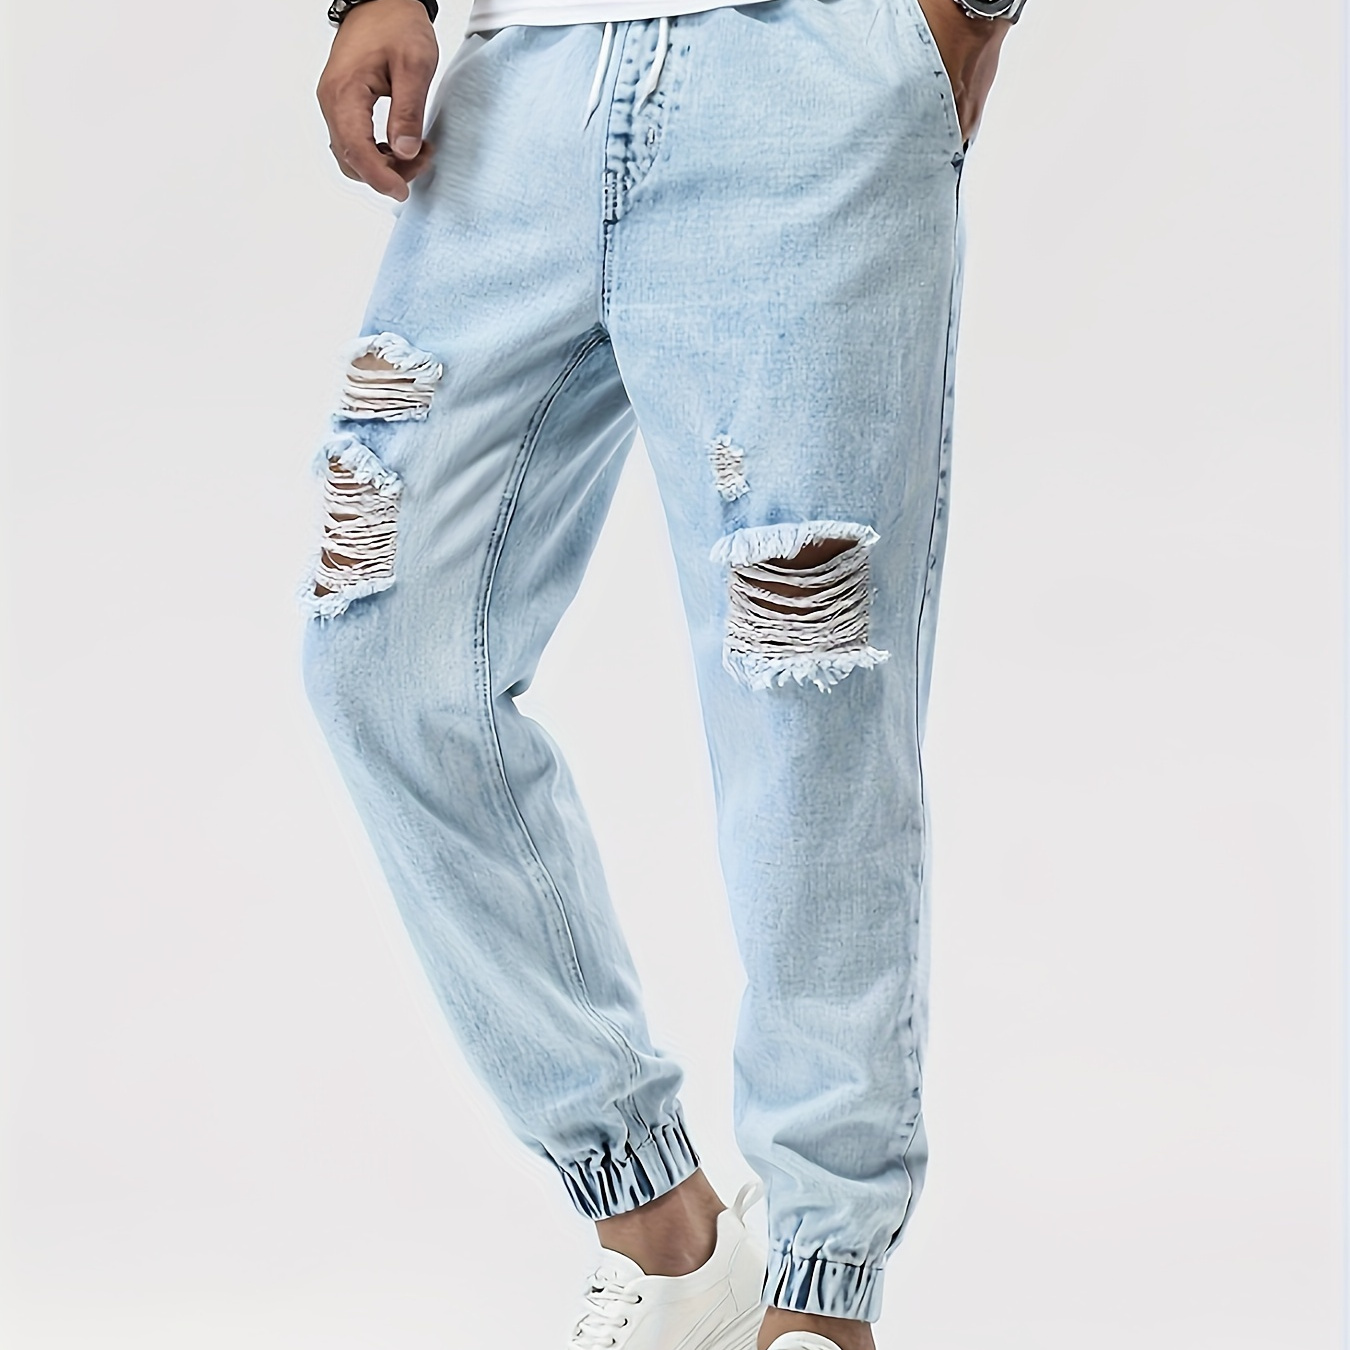 

Men's Light Wash Ripped Jeans With Drawstring Waist And Cuffed Ankles, Casual Style Denim Pants